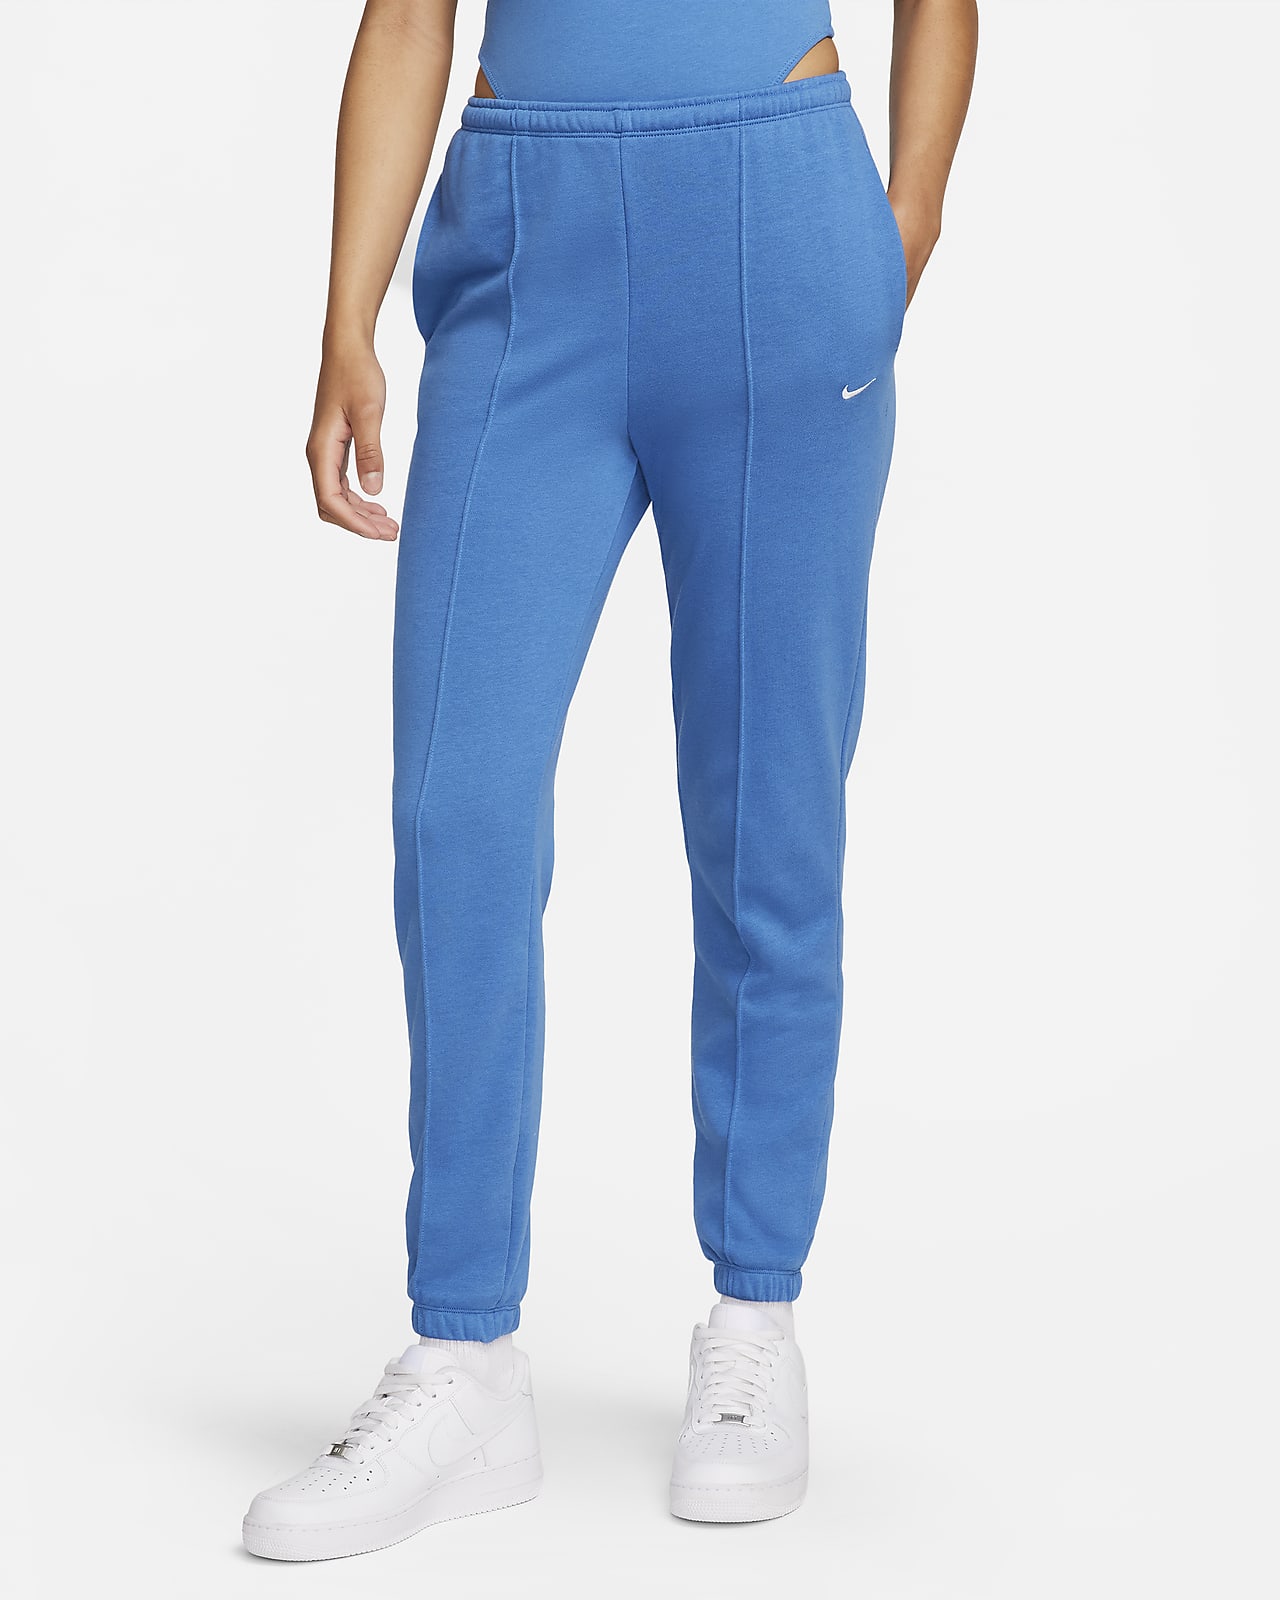 https://static.nike.com/a/images/t_PDP_1280_v1/f_auto,q_auto:eco/87256fb0-b768-49b3-997b-80fc9975efb2/sportswear-chill-terry-womens-slim-high-waisted-french-terry-sweatpants-LcJSpQ.png